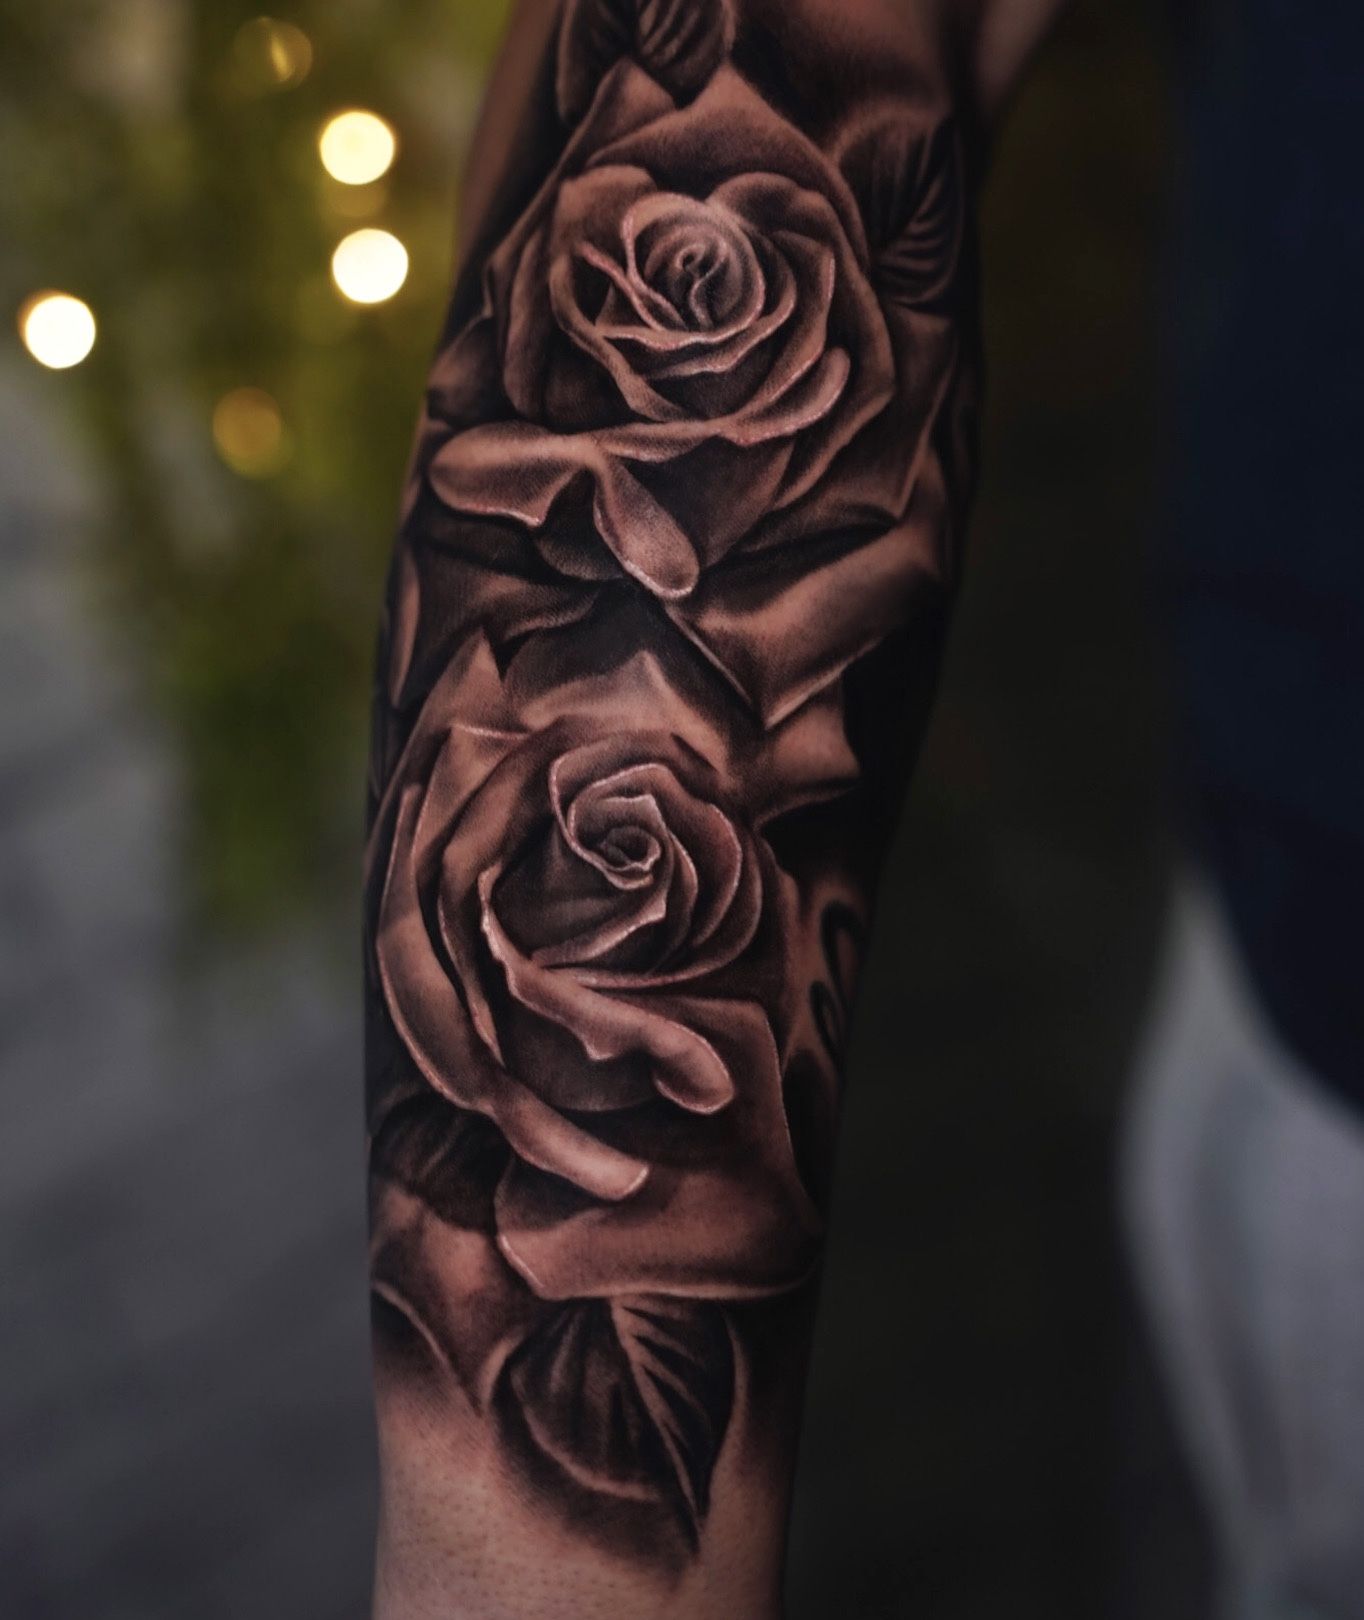 skull and rose tattoo by amy shapiro, I like the tree growing into the  skull and then the rose | Tattoos, Rose tattoo, Tattoos and piercings